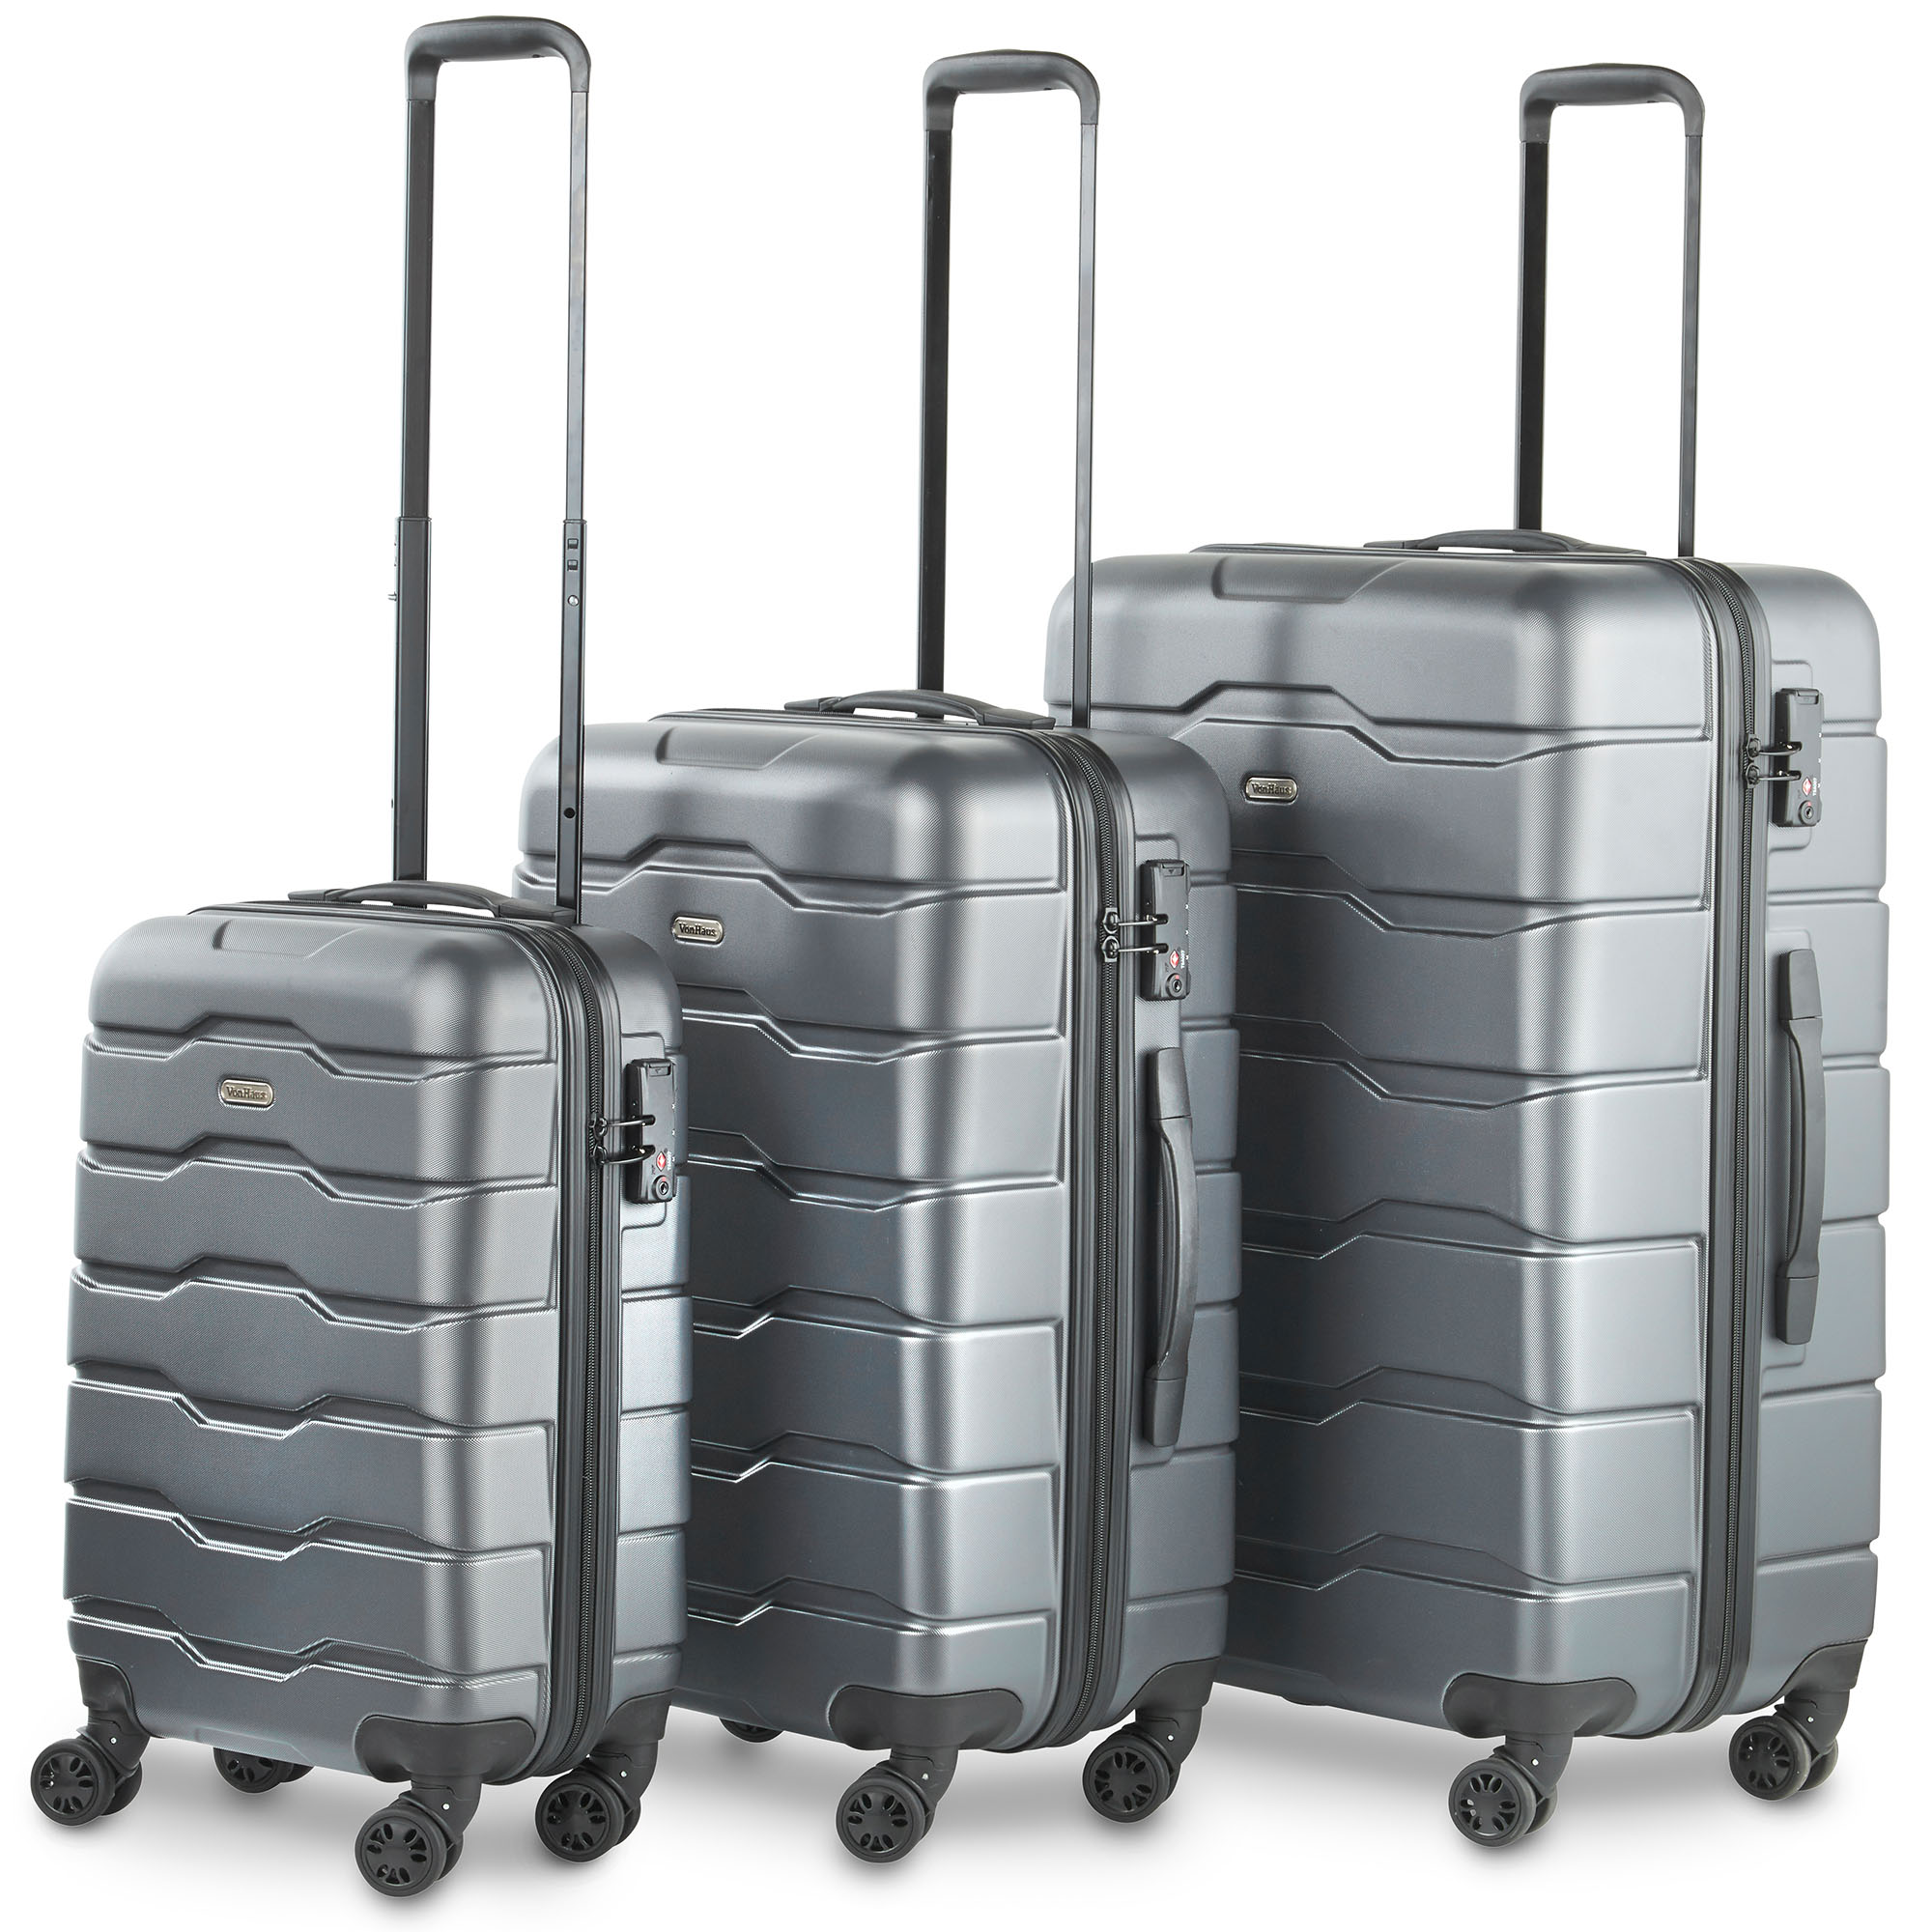 Hard Shell Suitcase With Lock Discount, 53% OFF | andreamotis.com